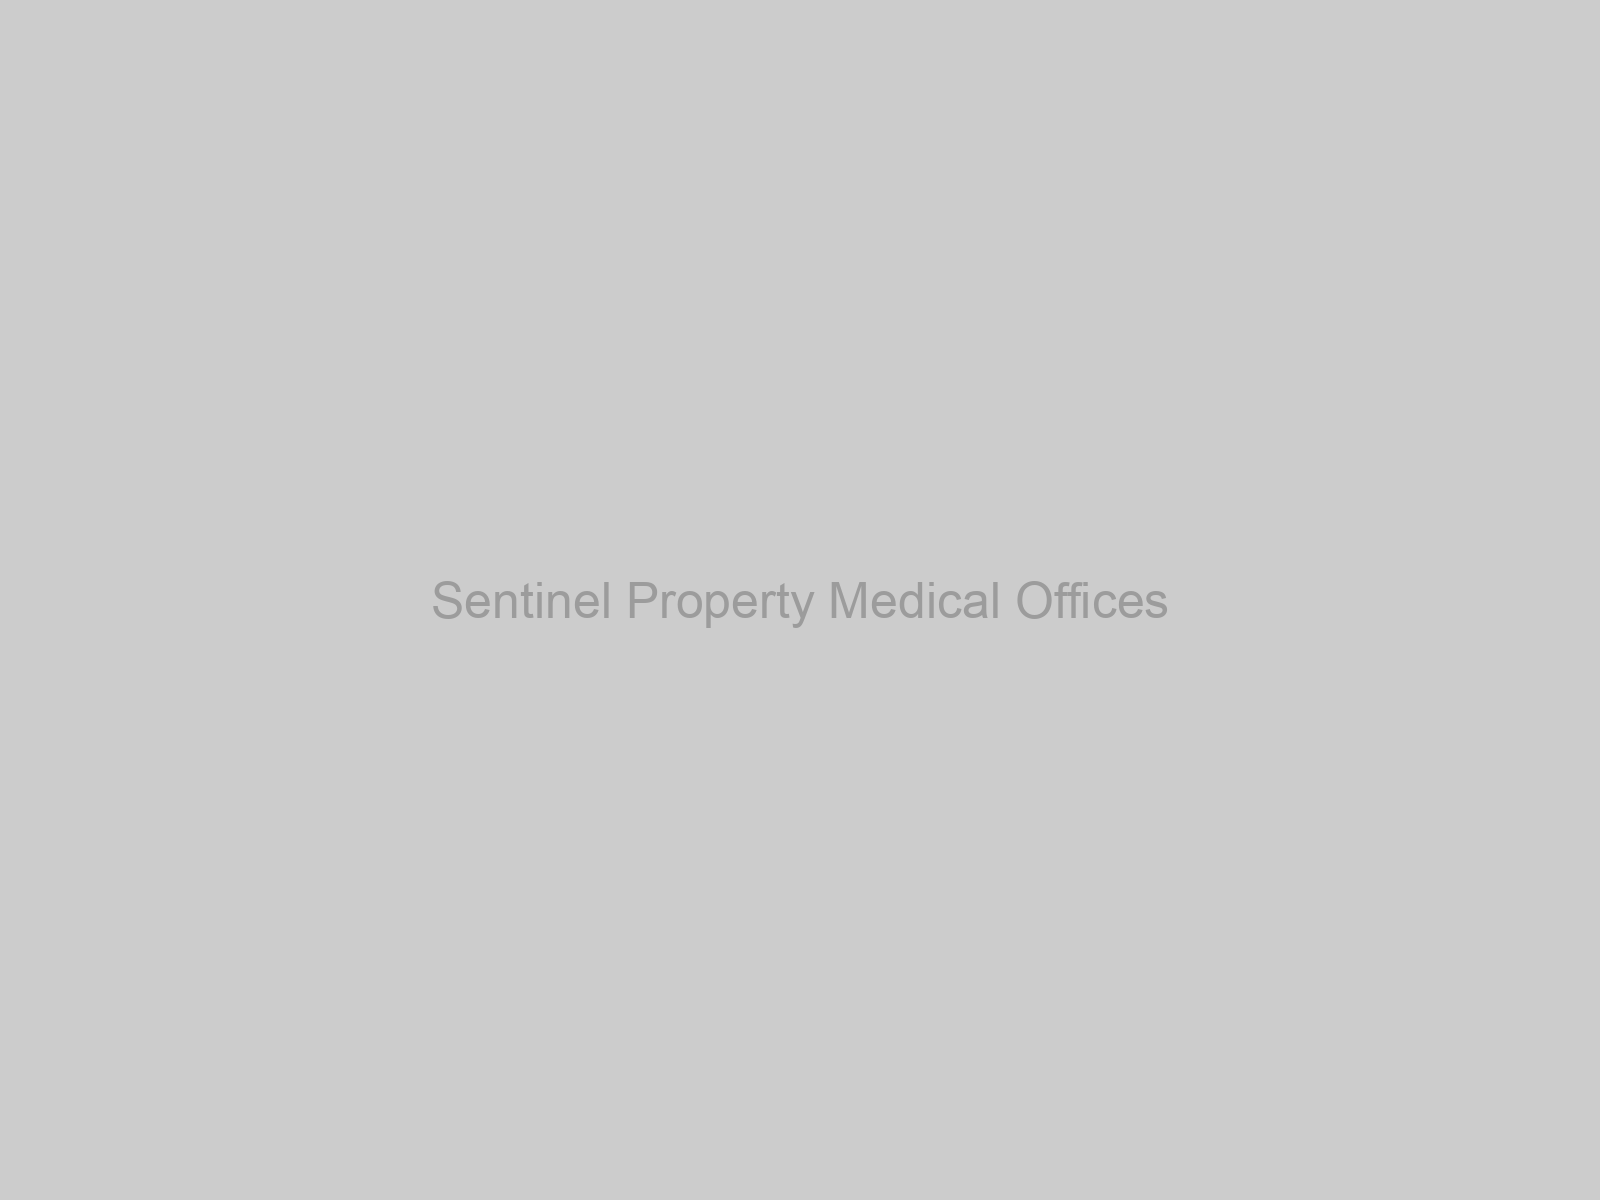 Sentinel Property Medical Offices